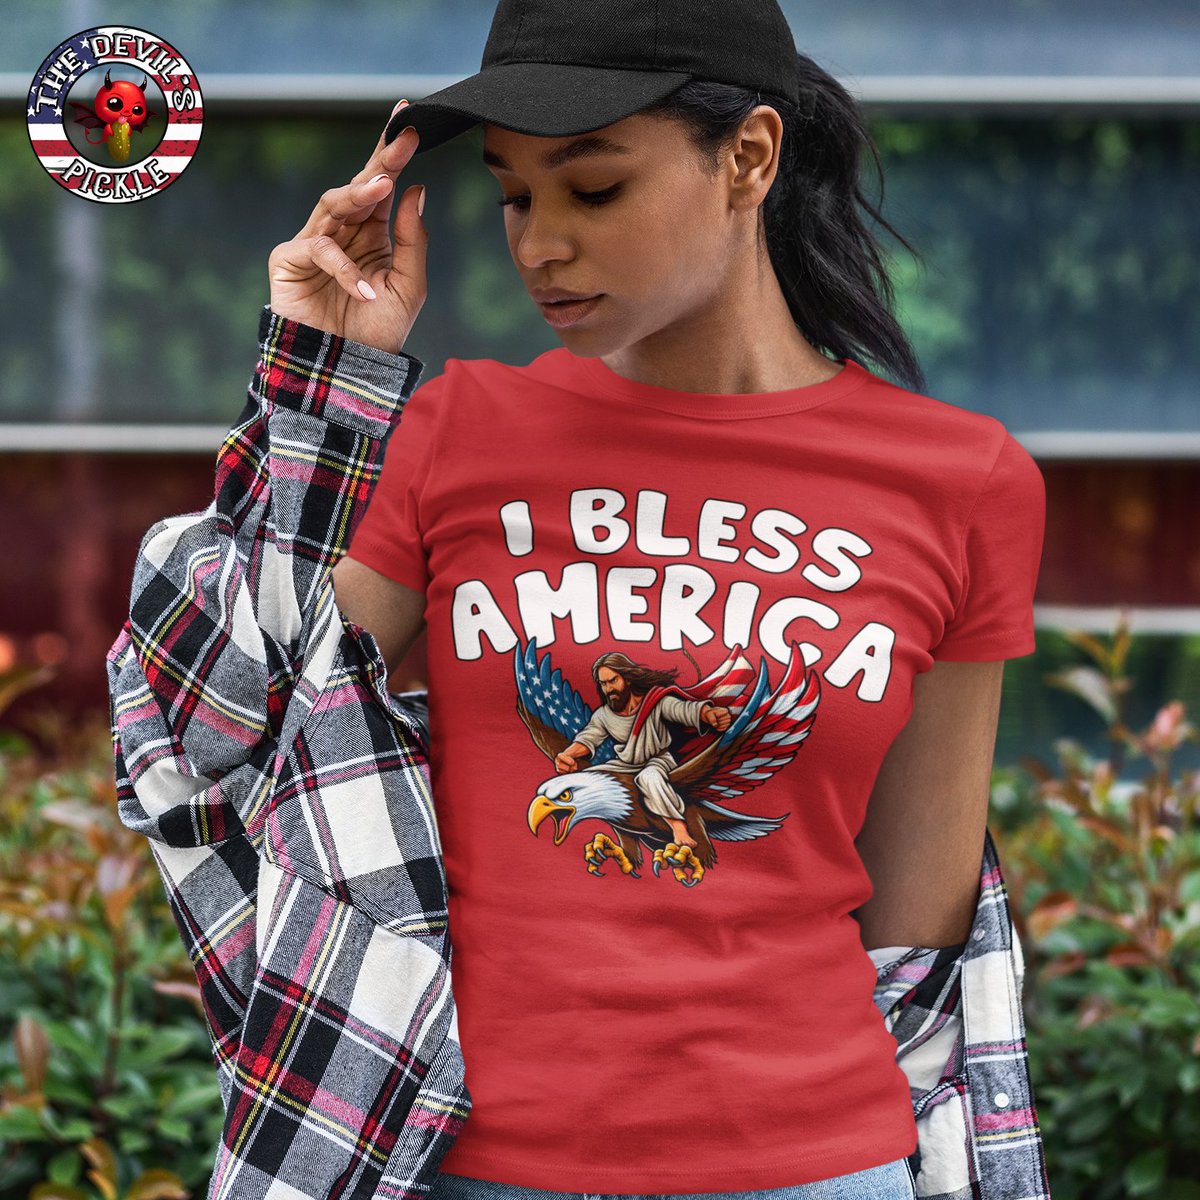 Jesus takes the reins... and the spotlight in this blessed tee. The Best Patriotic Tees, Hoodies, Sweatshirts and More!

 #patriot #ProudAmerican #winning #adultjokes #americanpride #funshirts #USA #UnitedStates #merica #american #hellyeahamerica #adultinghumor #freeshipping